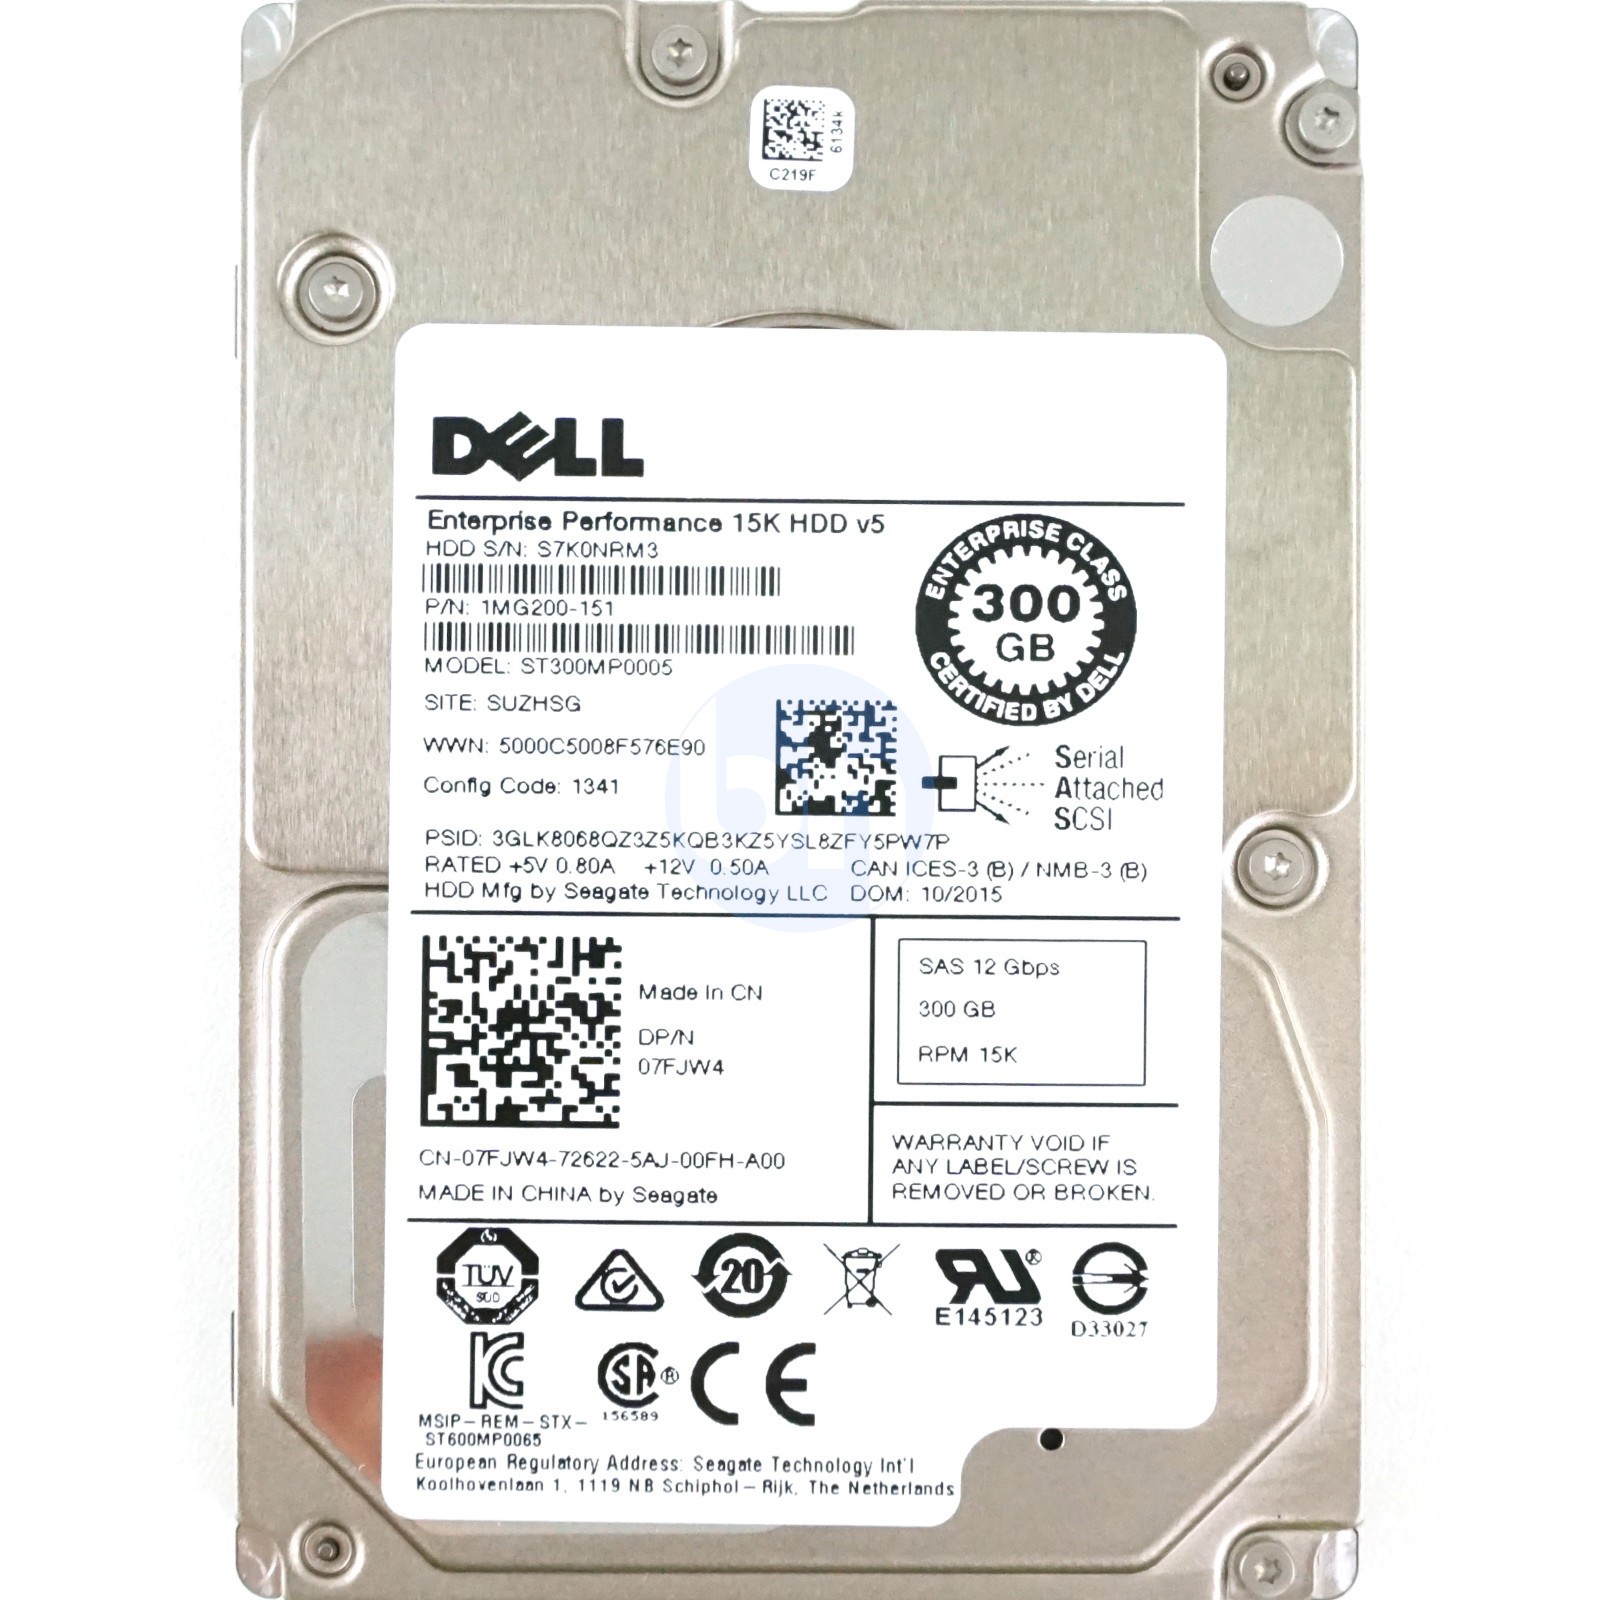 Dell (7FJW4) - 300GB Enterprise Class (SFF 2.5in) SAS-3 12Gbps 15K HDD